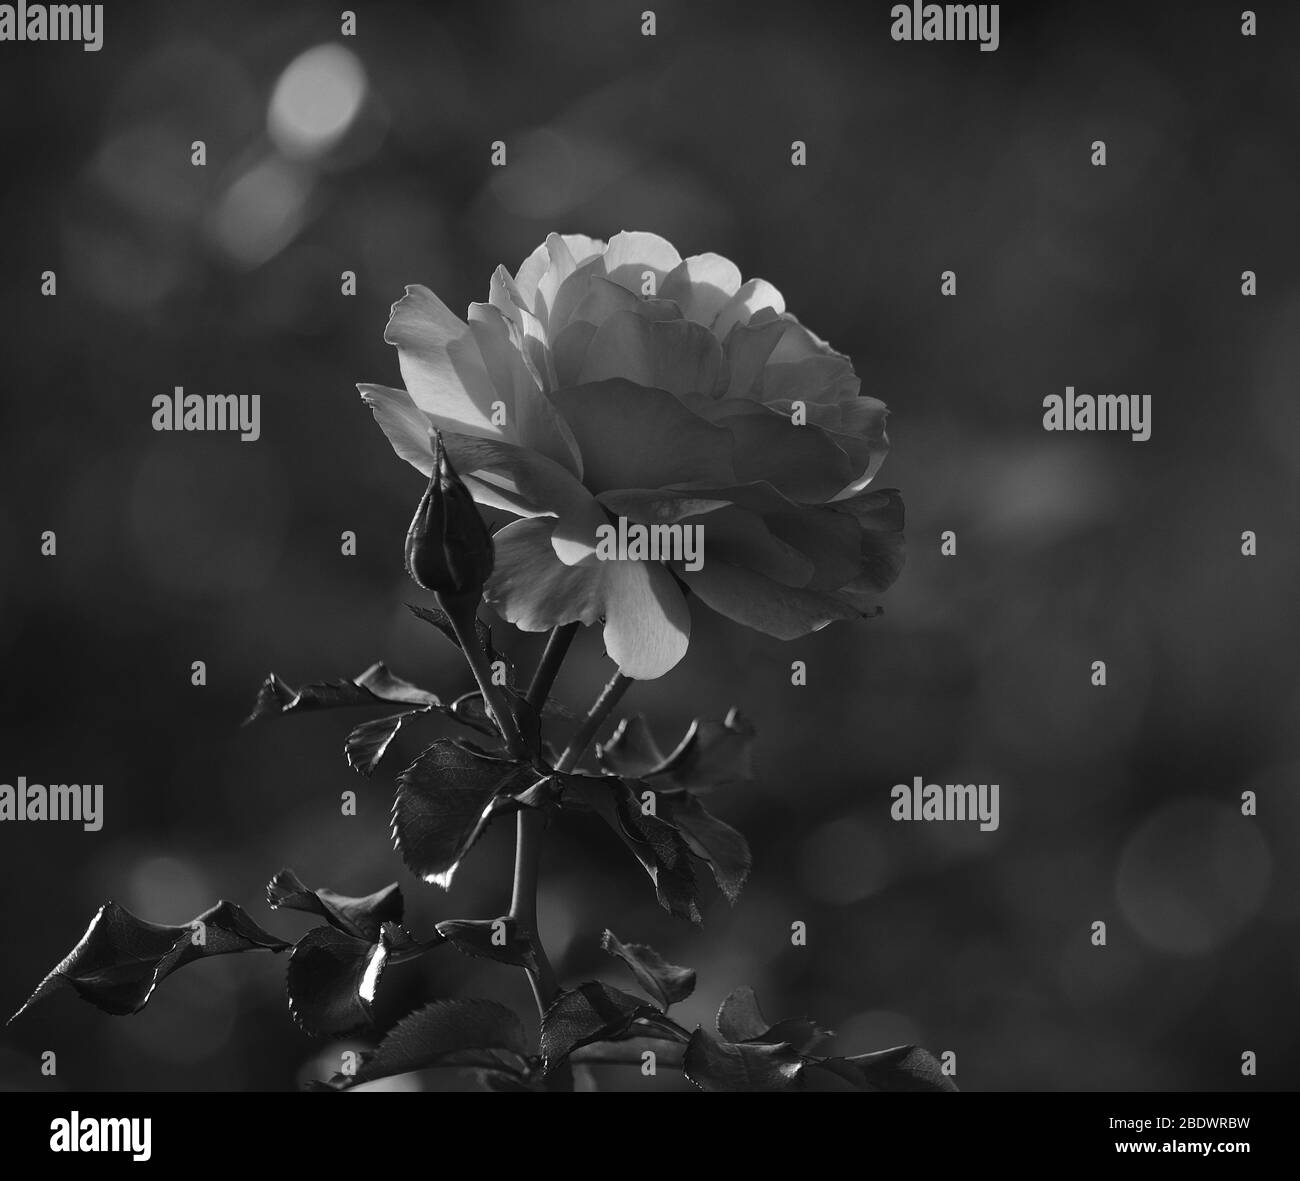 Isolated rose in full splendor with black and white effect Stock Photo